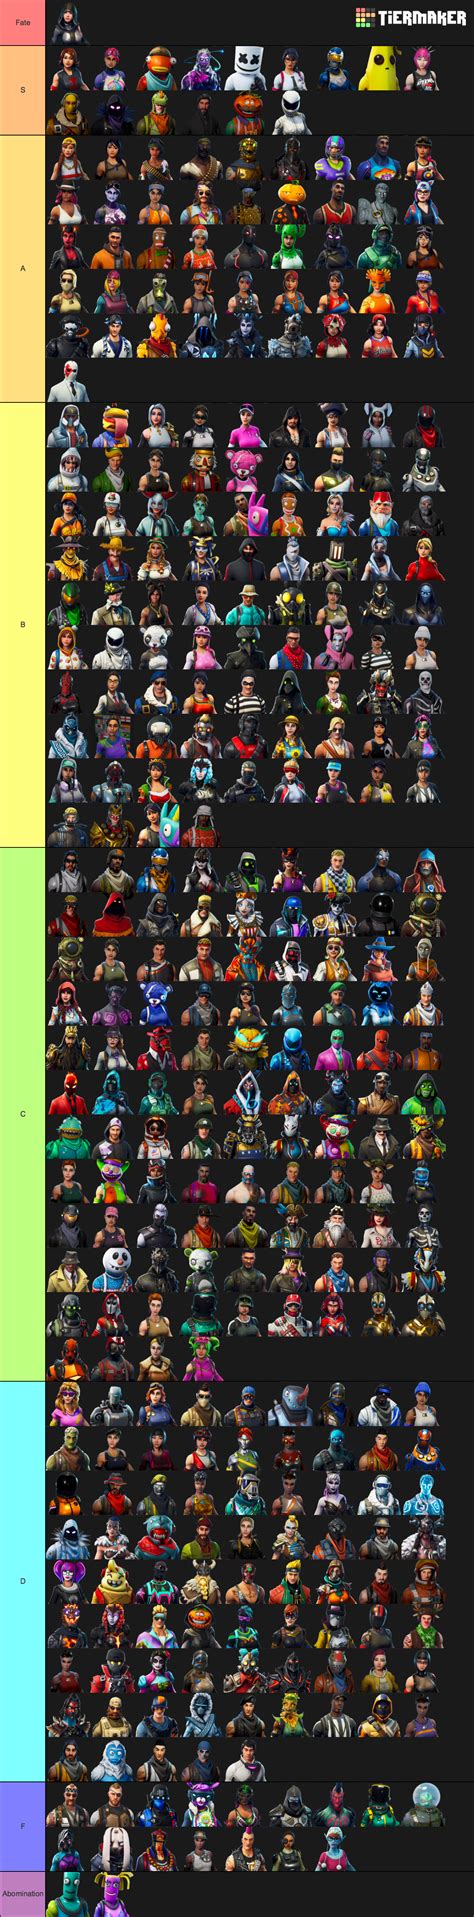 What are the 2019 fortnite halloween skins? Create a Fortnite Every Skin Tier List - TierMaker